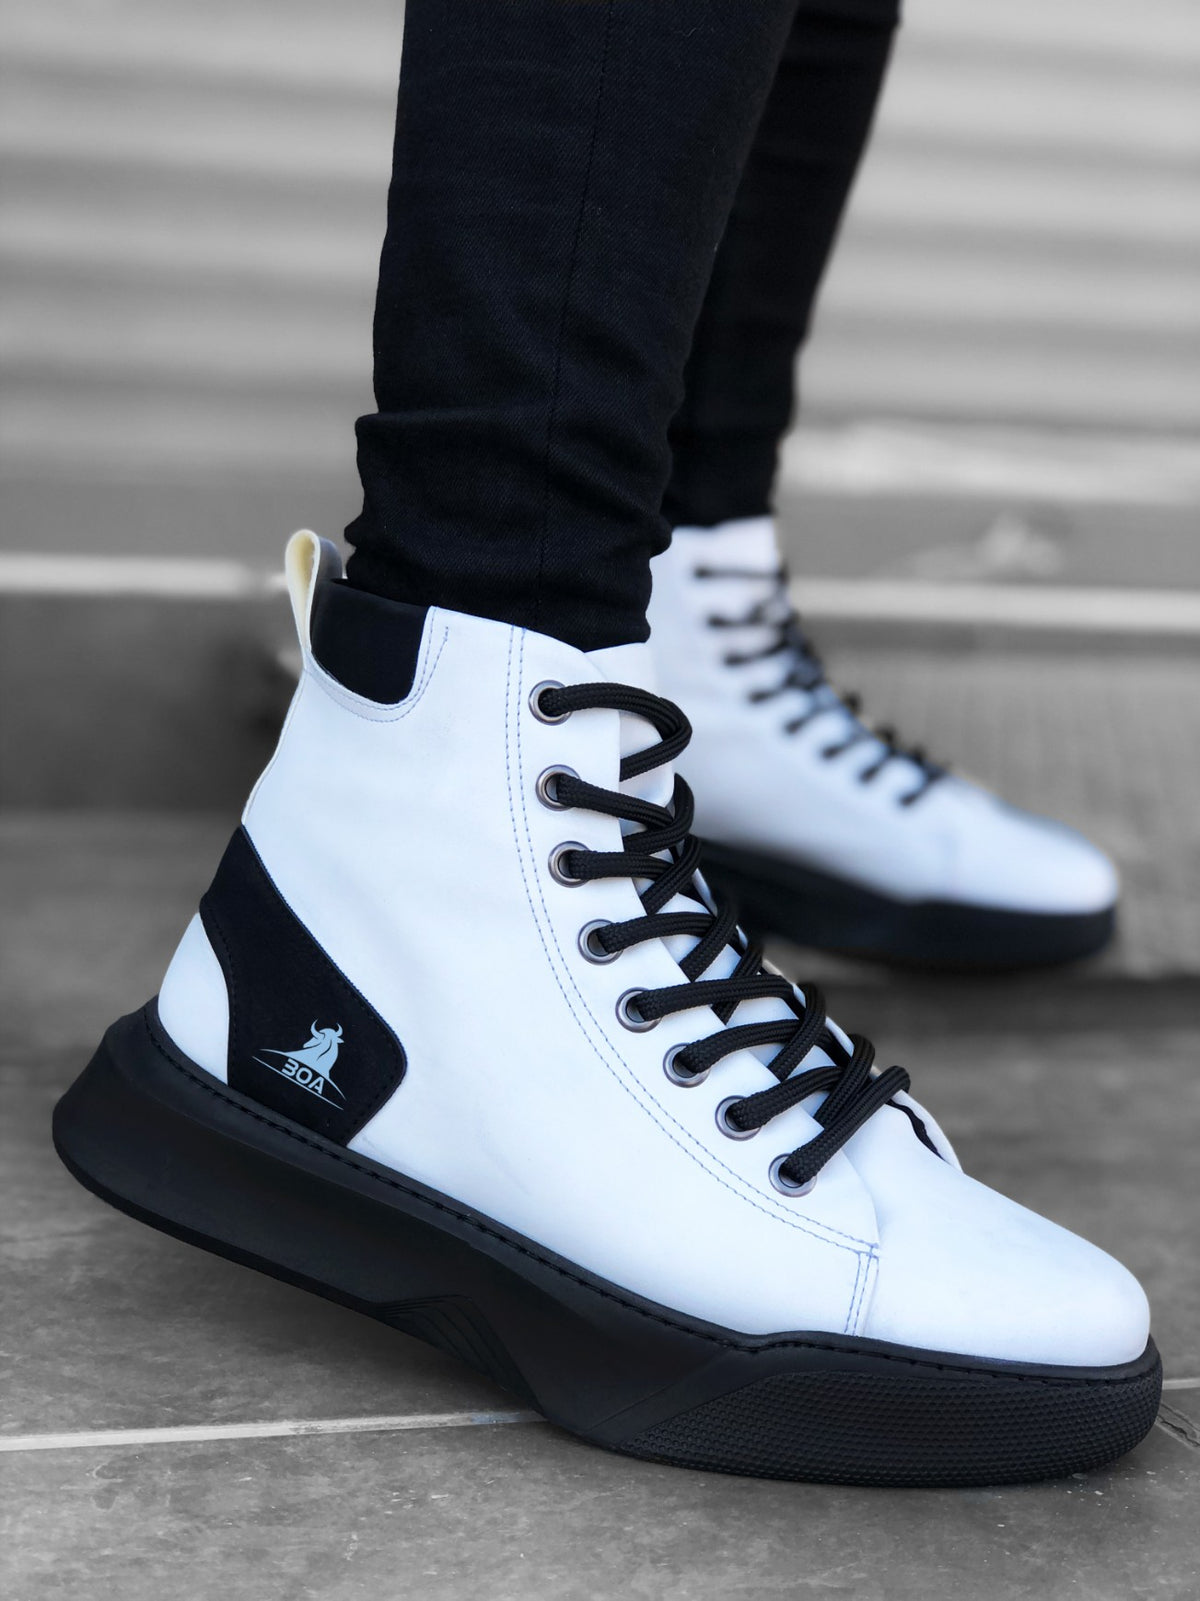 BA0155 Lace-Up Men's High Sole White Black Sole Sport Boots - STREETMODE ™